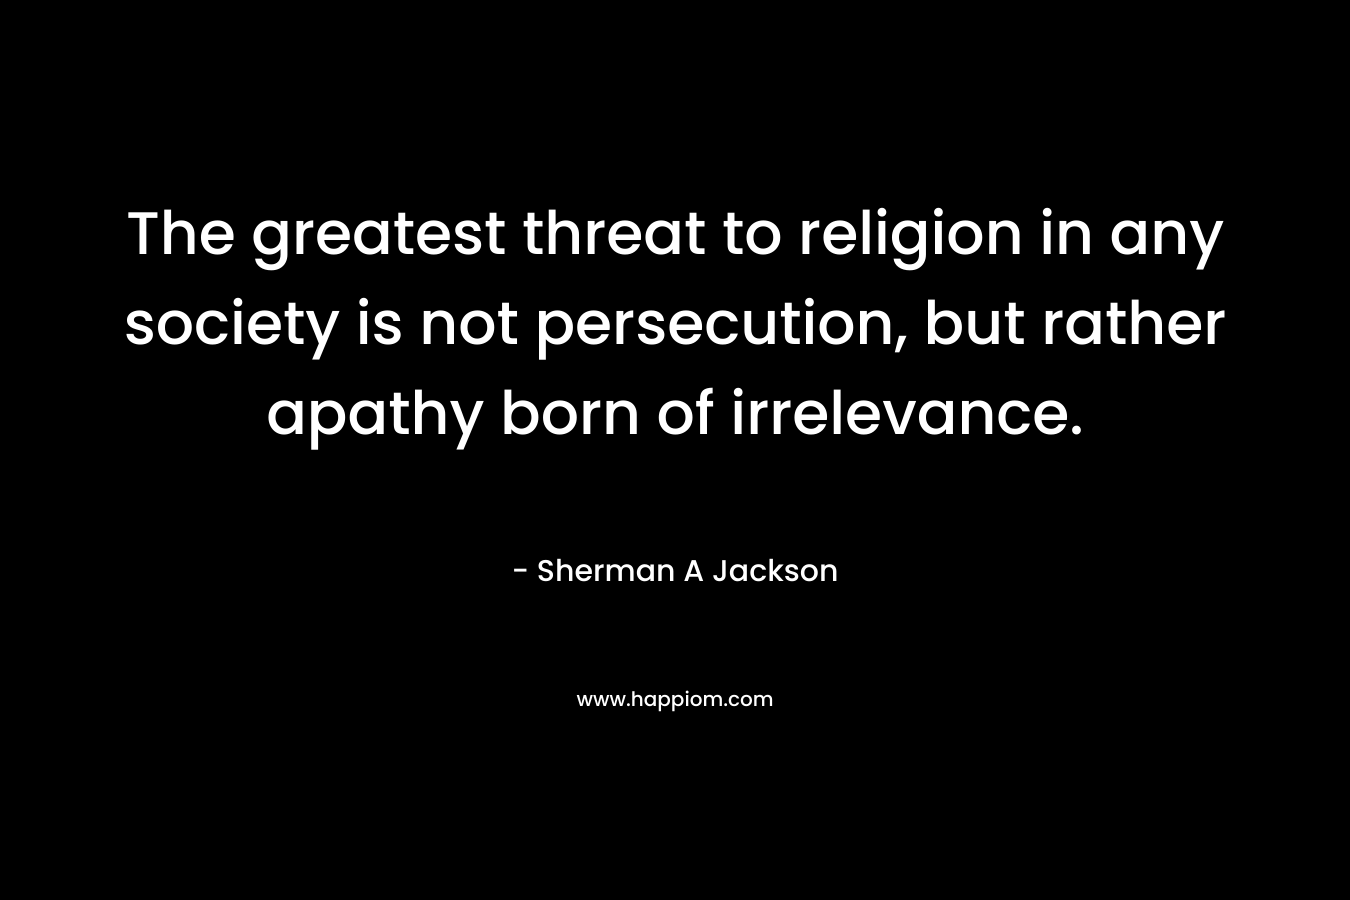 The greatest threat to religion in any society is not persecution, but rather apathy born of irrelevance.